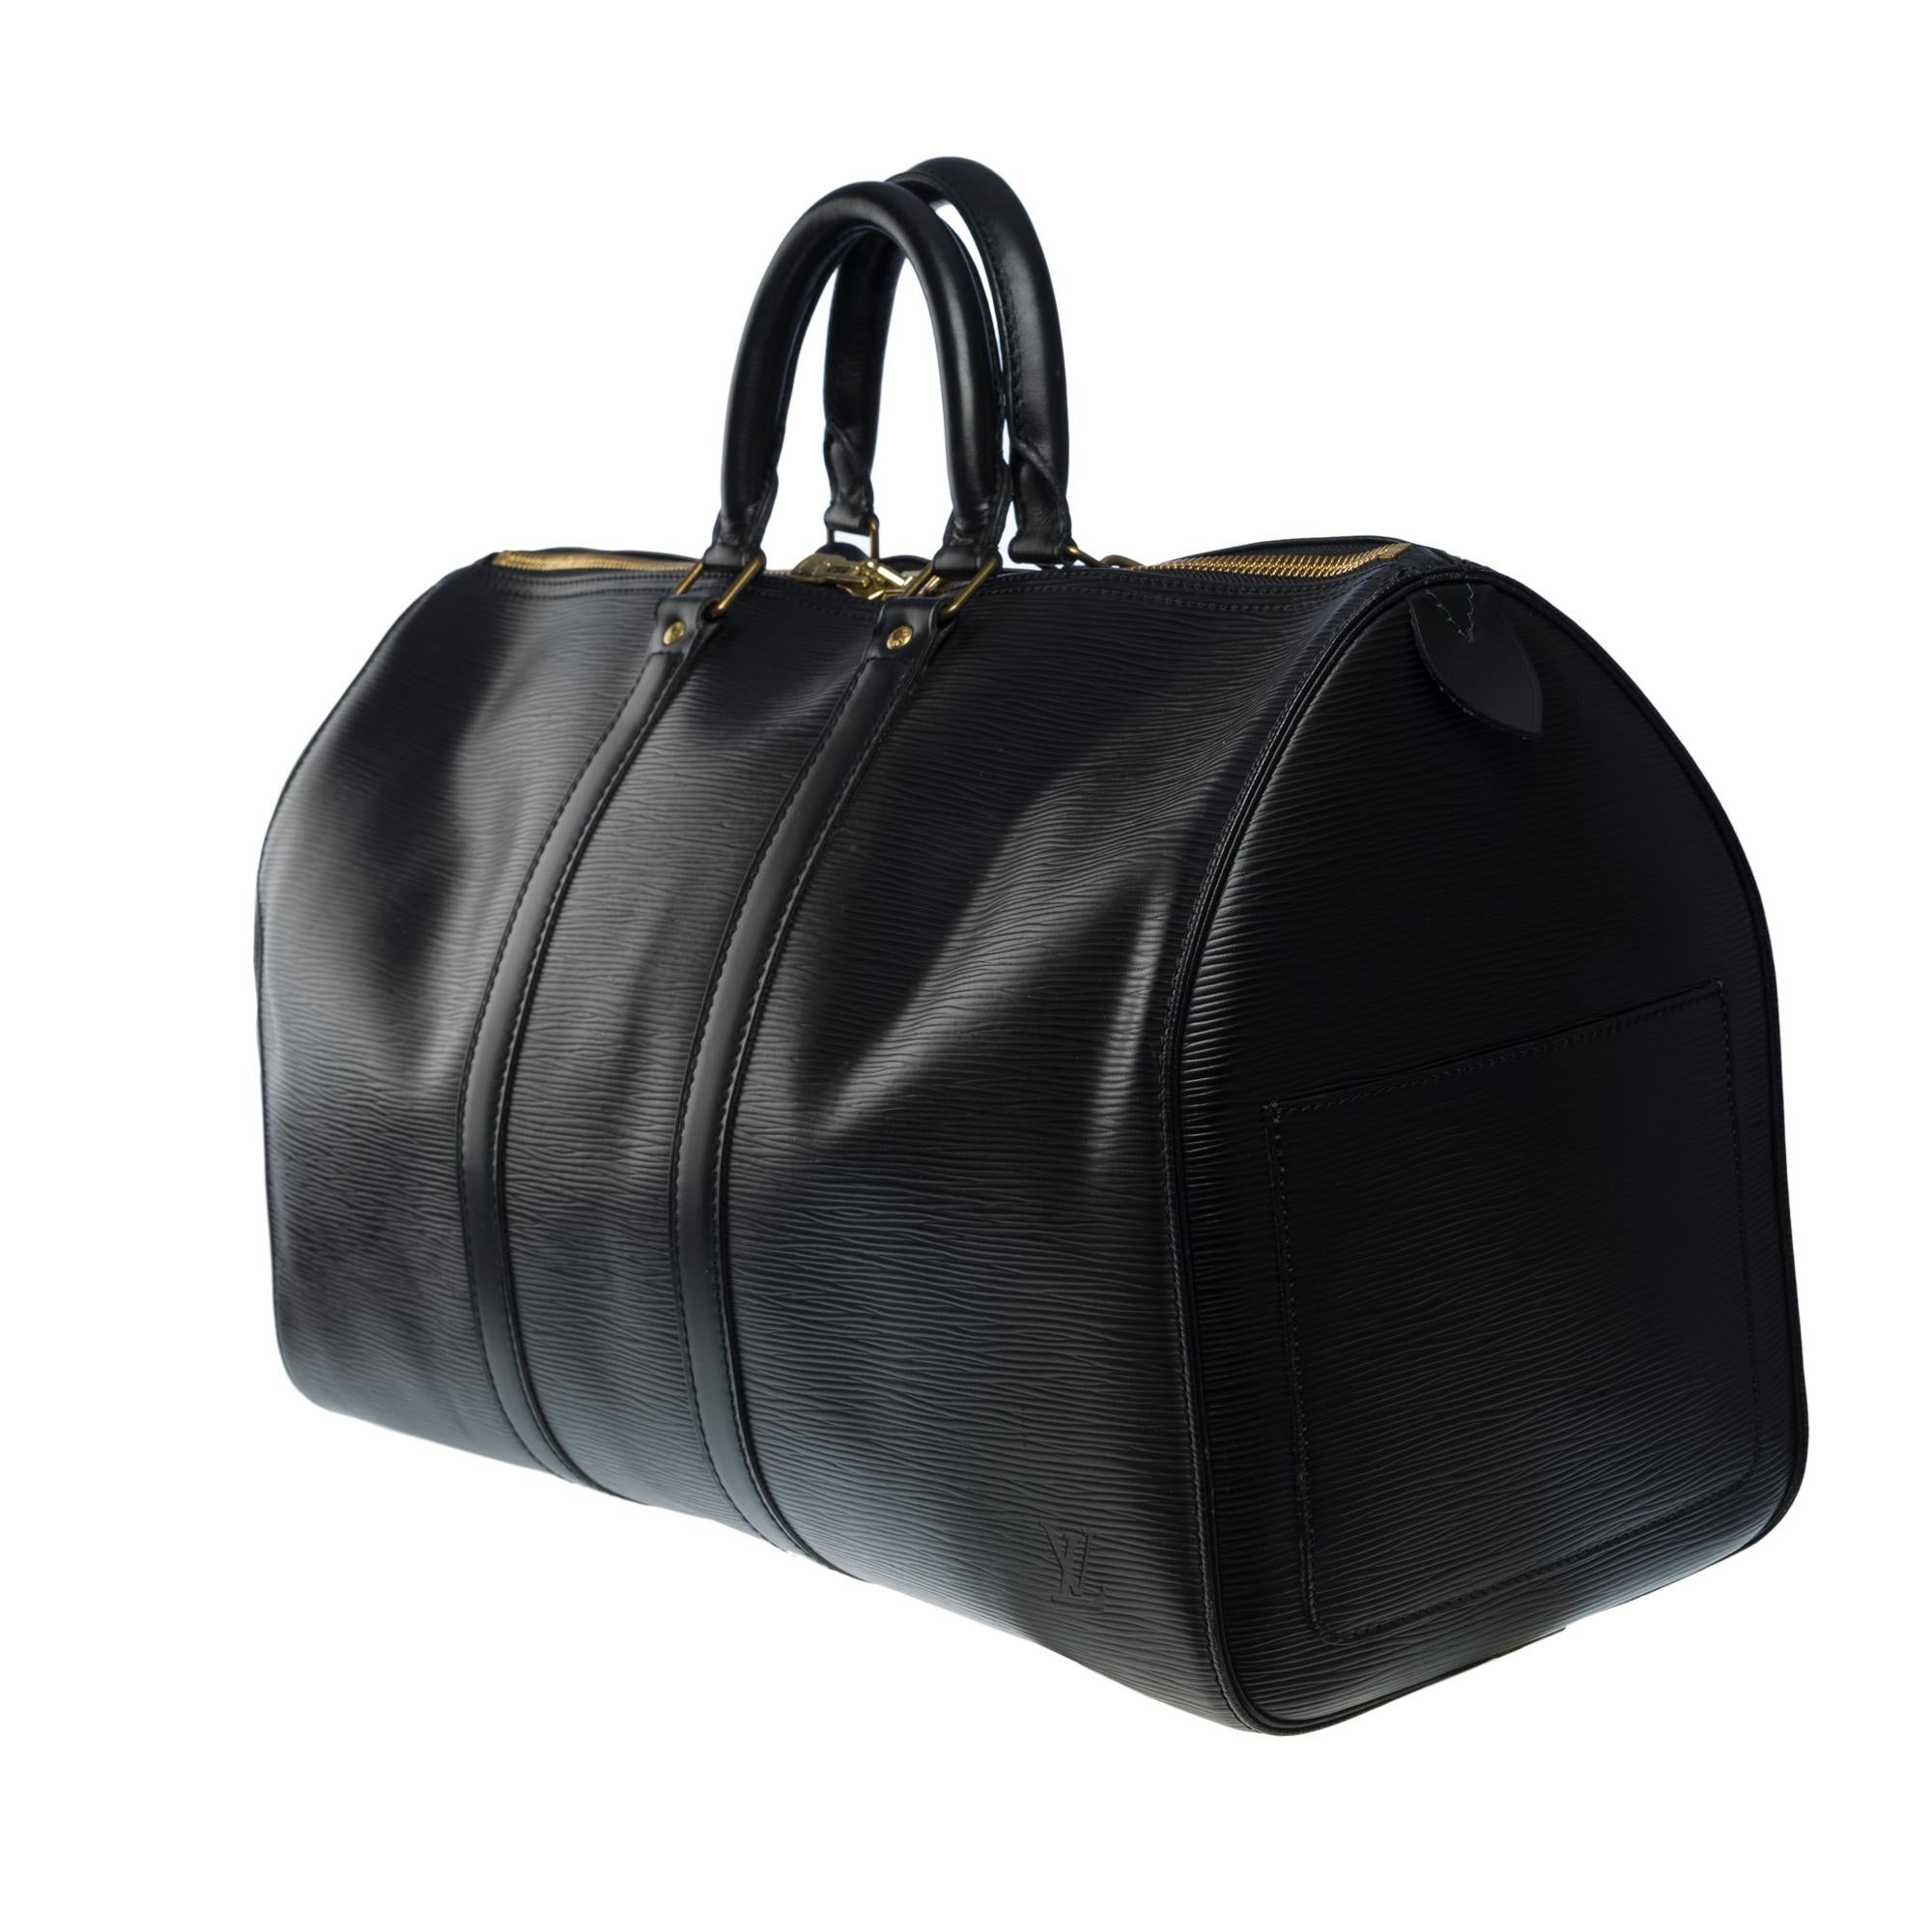 Women's or Men's The very Chic Louis Vuitton Keepall 45 Travel bag in black epi leather, GHW